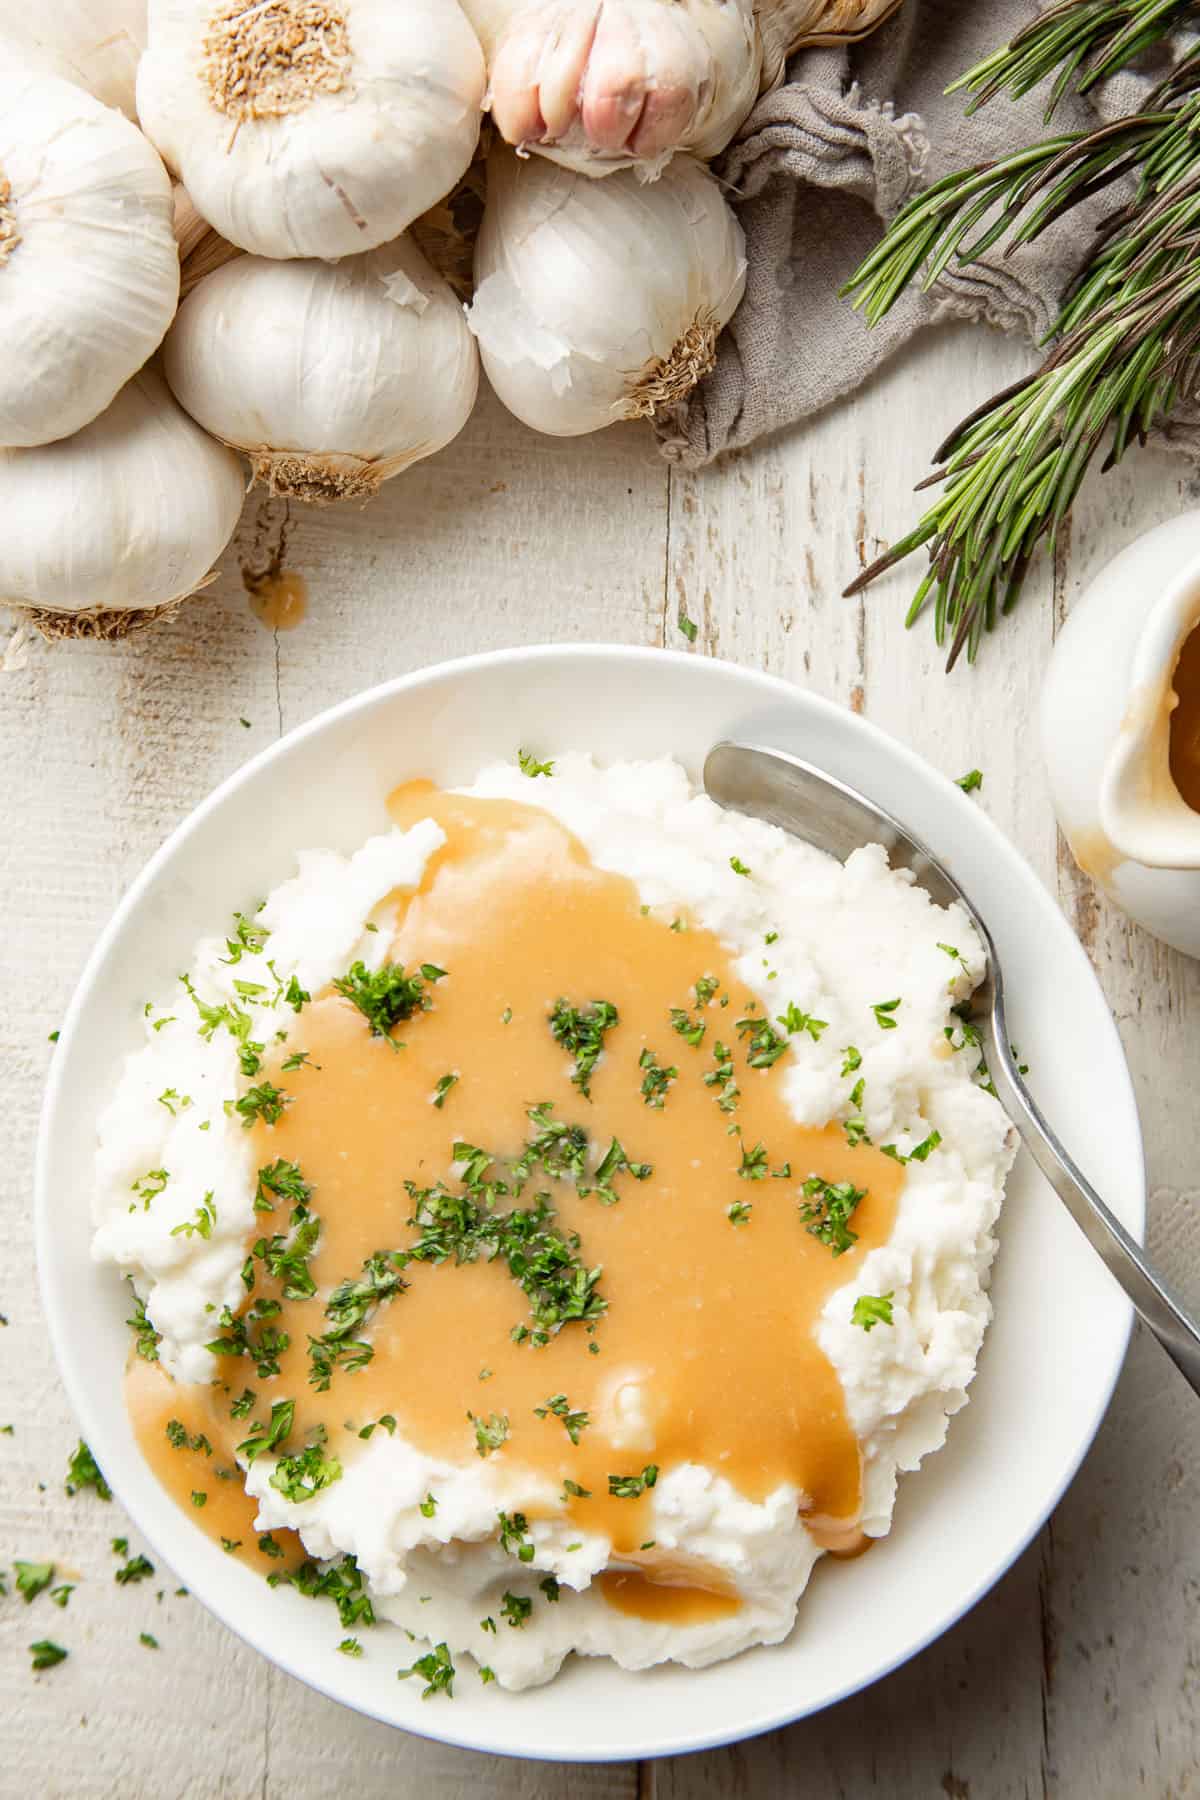 White wooden surface set with fresh garlic and rosemary sprigs, and bowl of mashed potatoes and Roasted Garlic Gravy.